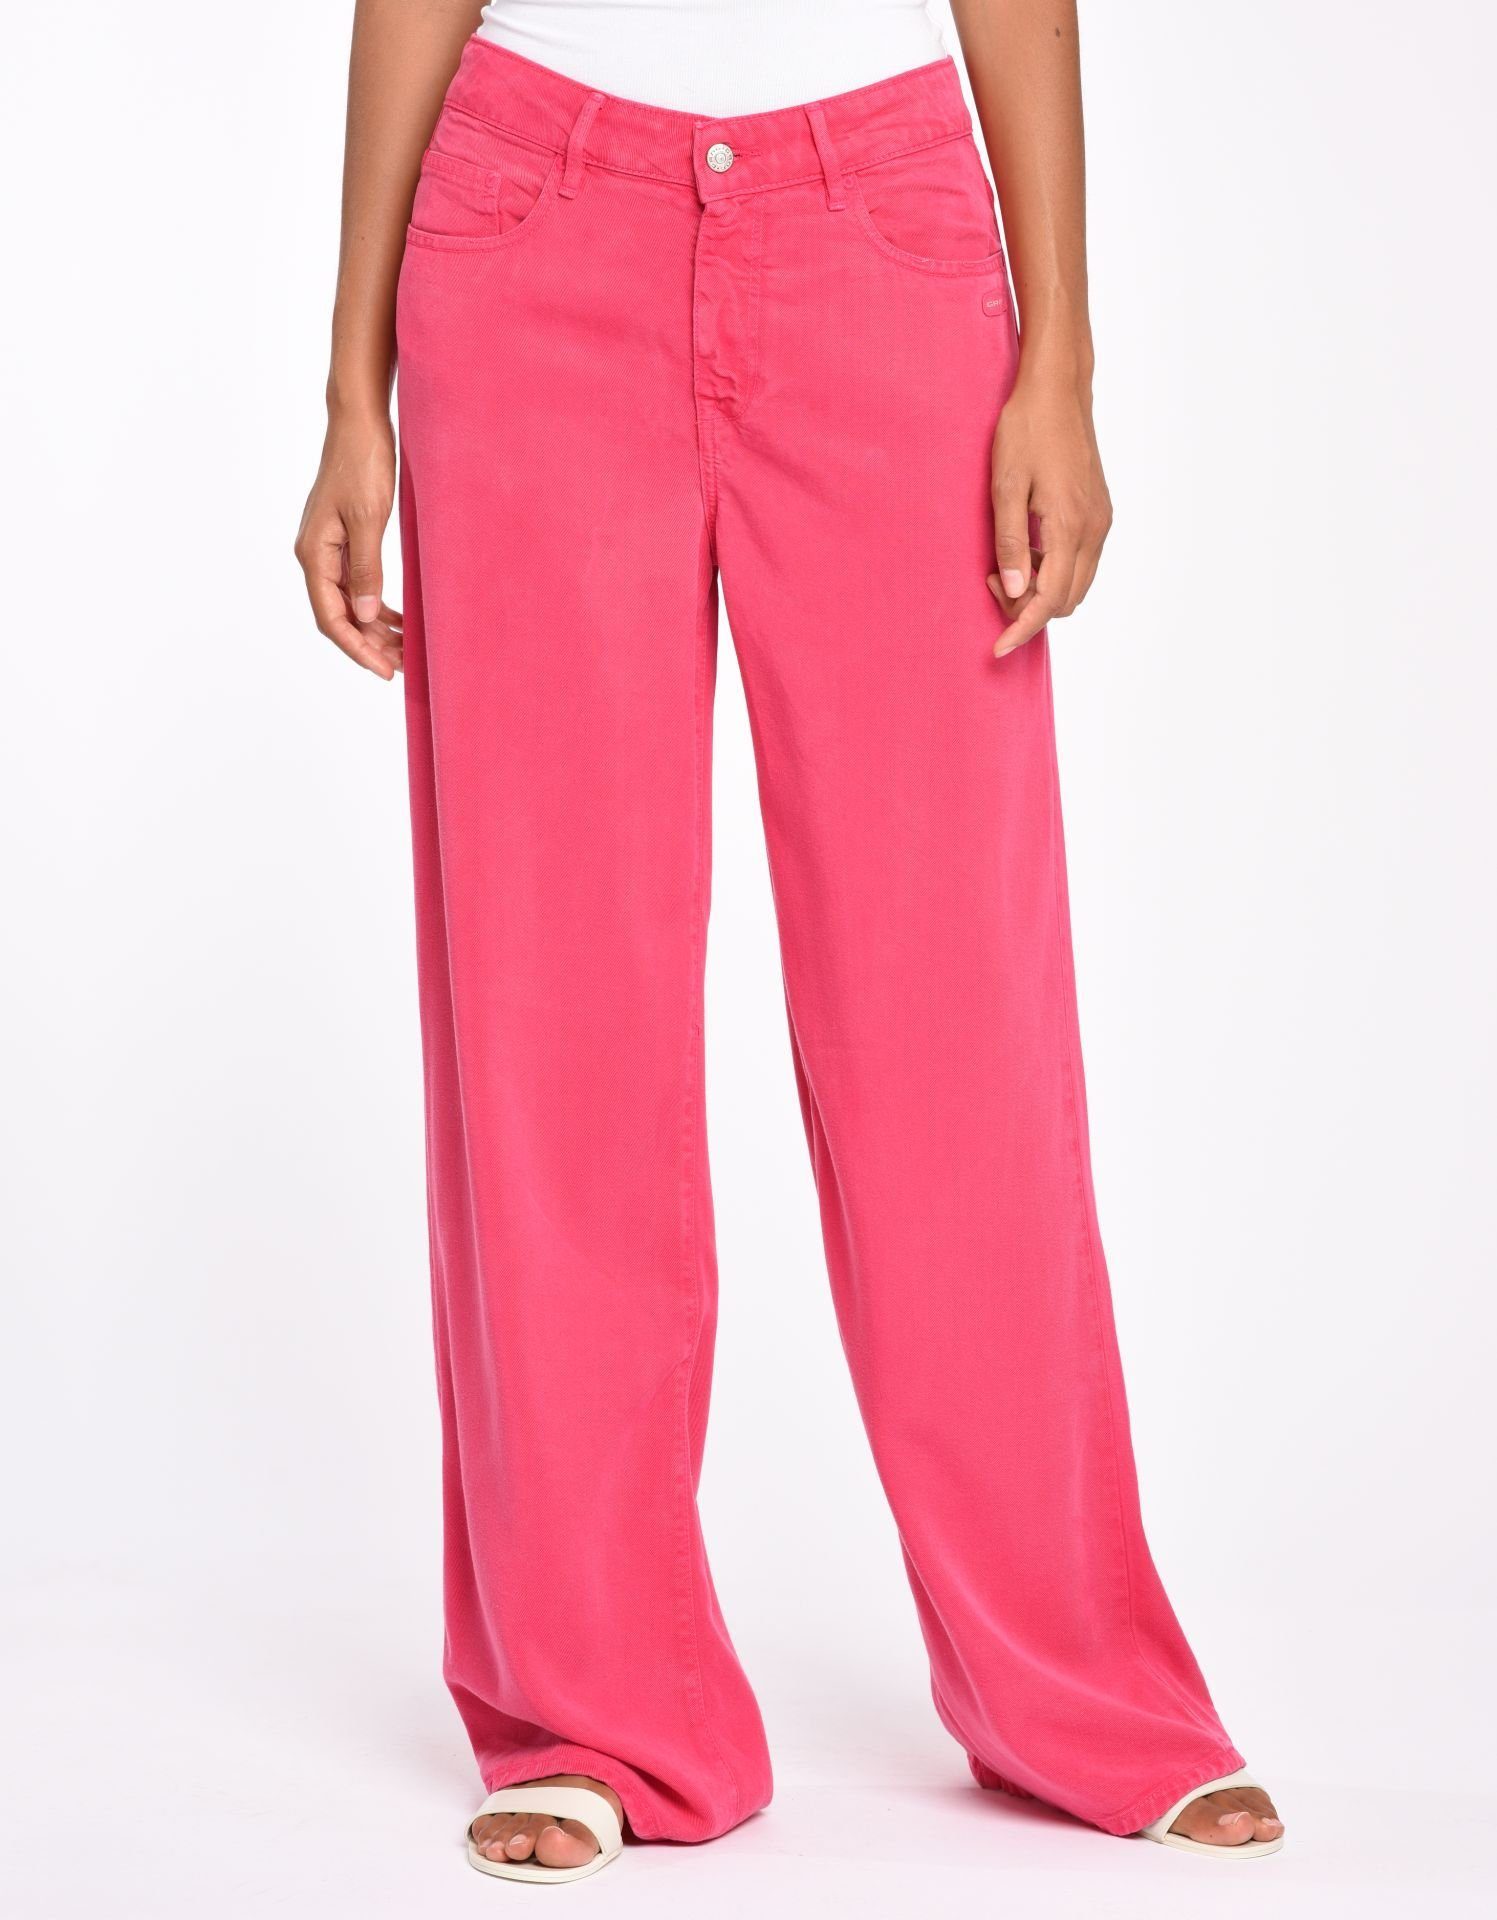 6359 Jeans Weite fuxia GANG pink